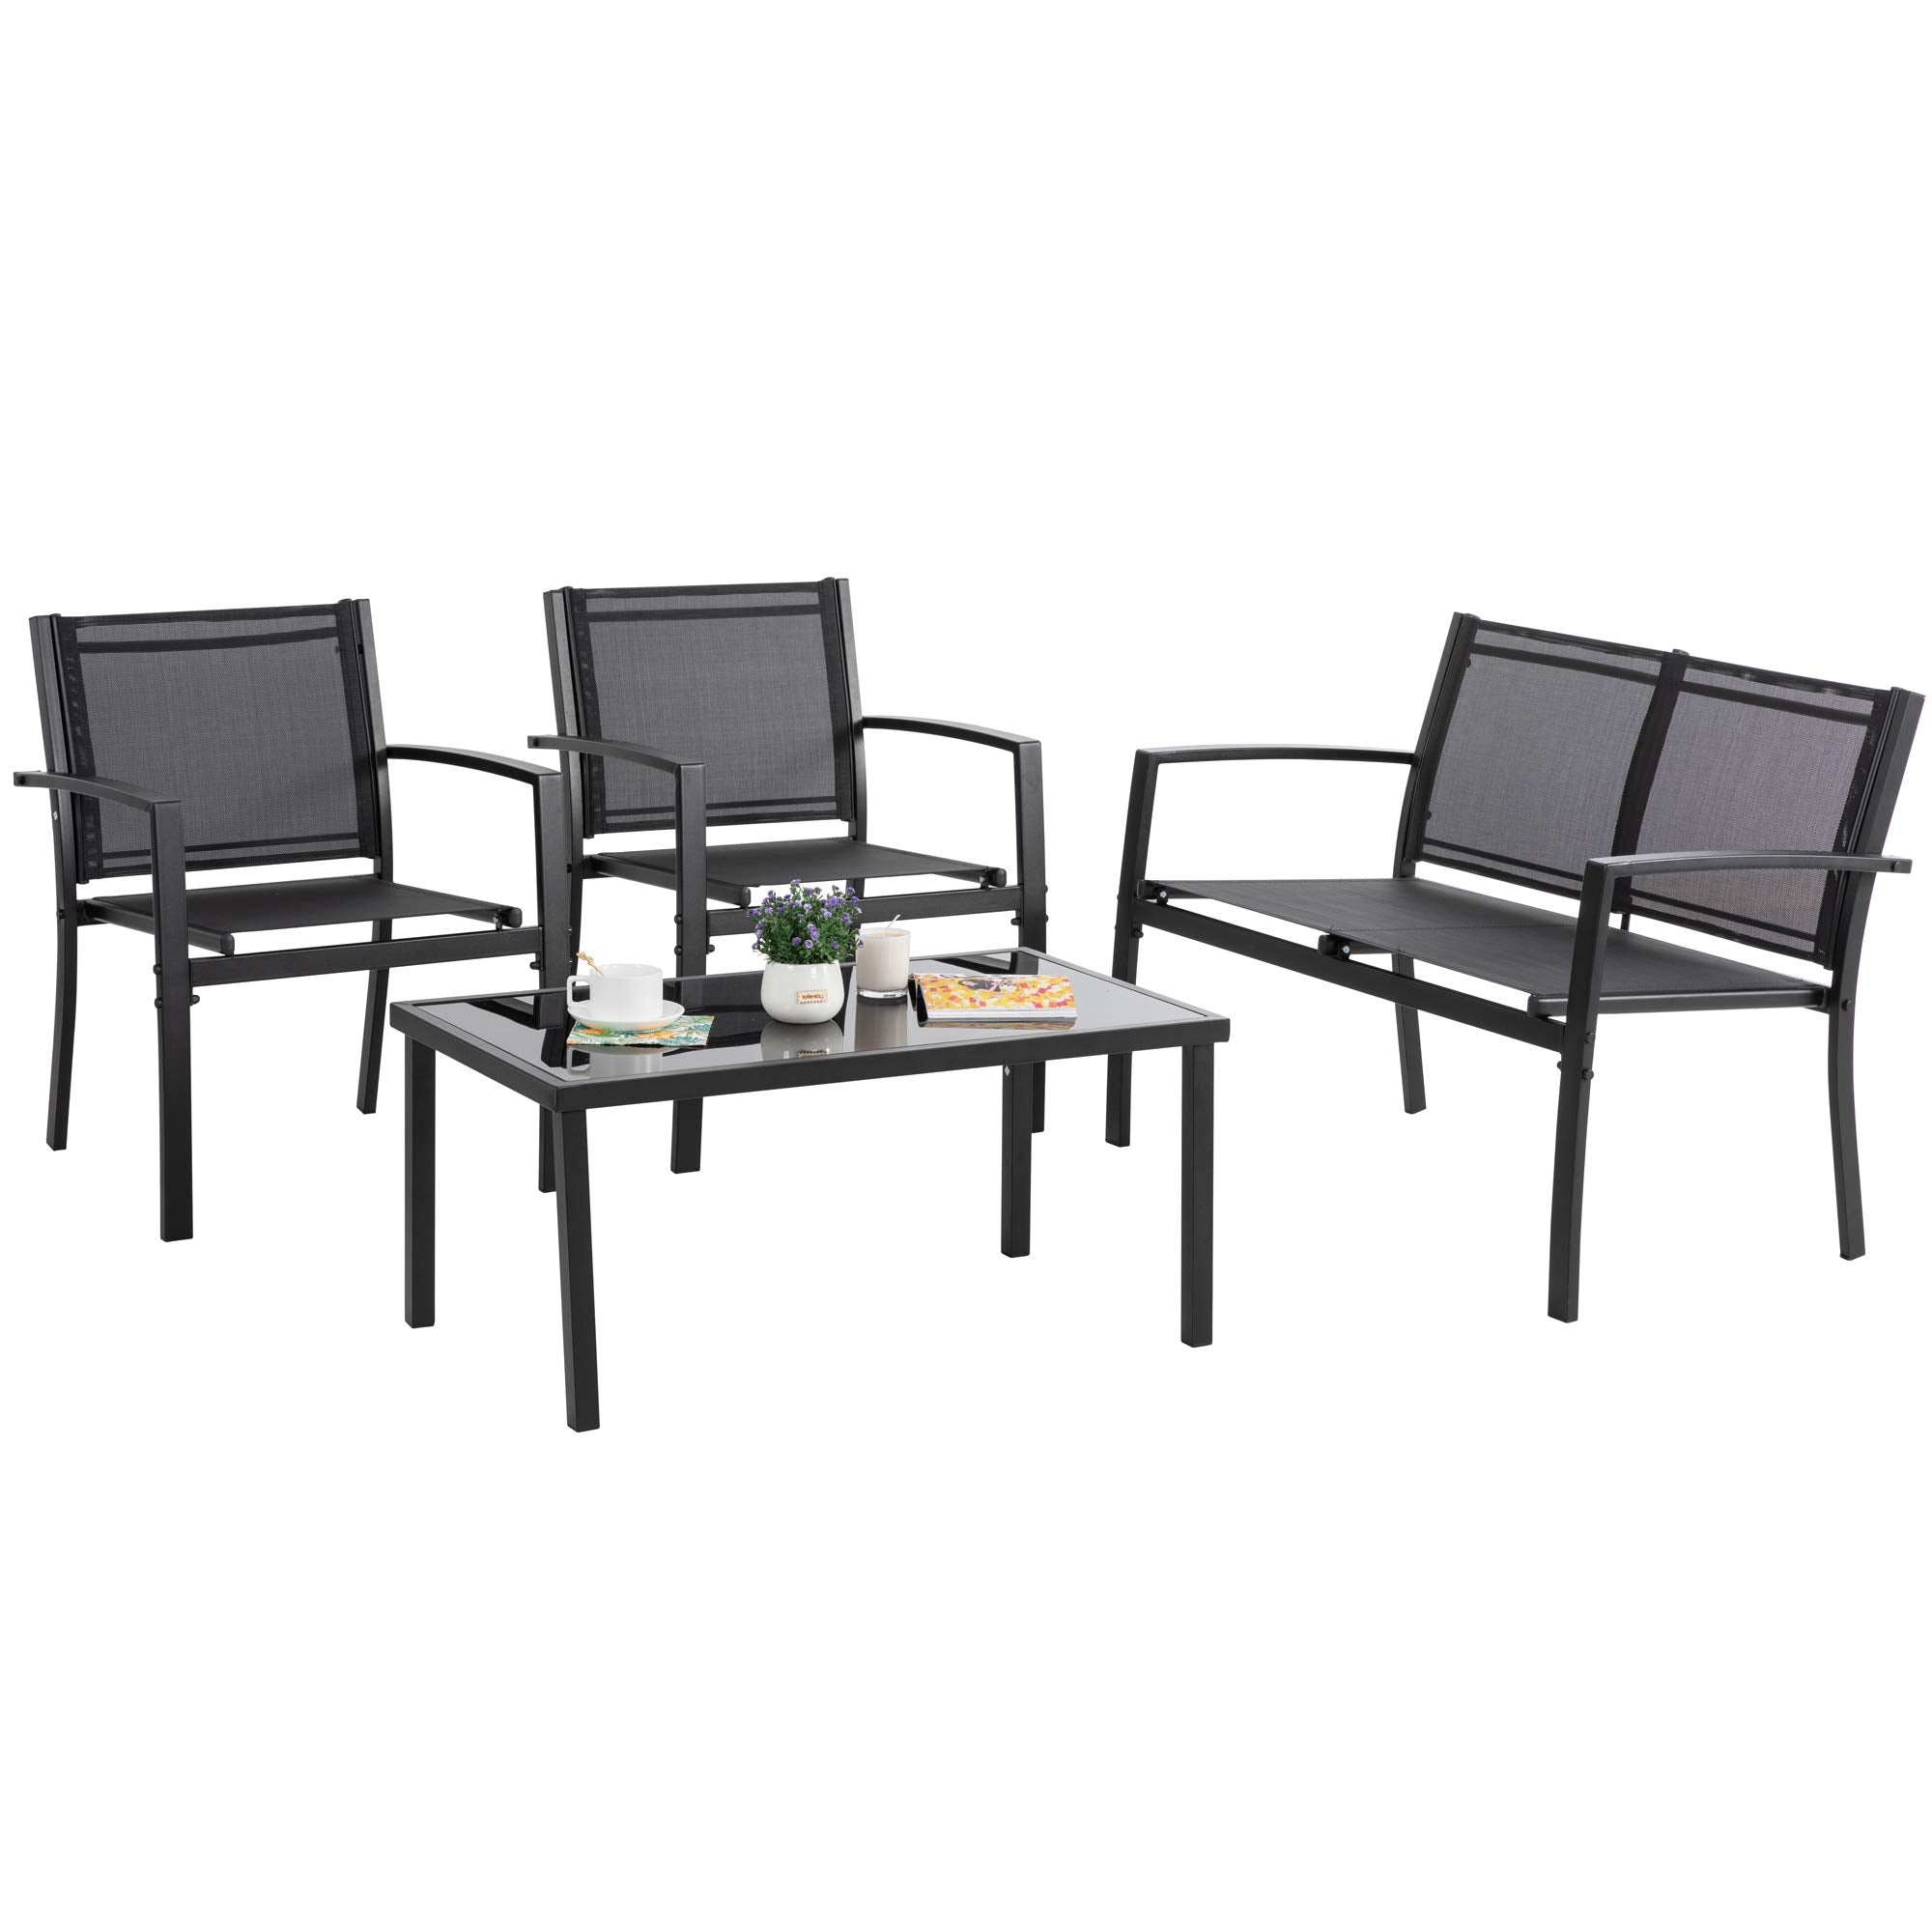 4 Pieces Patio Furniture Sets, Outdoor Patio Conversation Sets with Glass Coffee Table